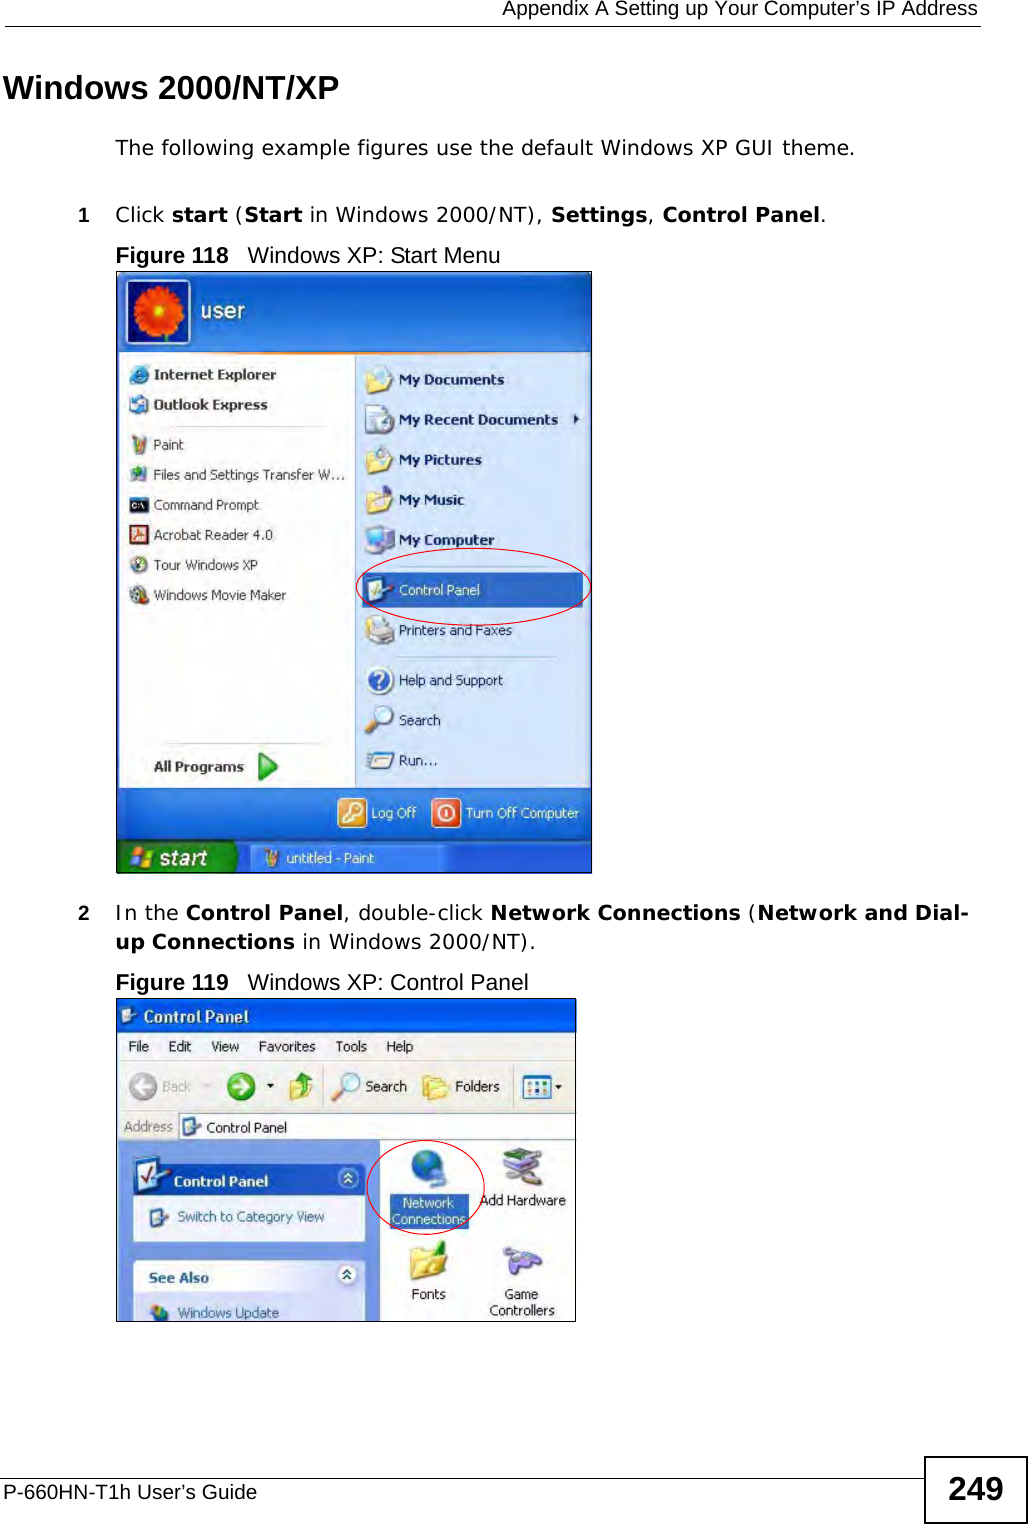  Appendix A Setting up Your Computer’s IP AddressP-660HN-T1h User’s Guide 249Windows 2000/NT/XPThe following example figures use the default Windows XP GUI theme.1Click start (Start in Windows 2000/NT), Settings, Control Panel.Figure 118   Windows XP: Start Menu2In the Control Panel, double-click Network Connections (Network and Dial-up Connections in Windows 2000/NT).Figure 119   Windows XP: Control Panel